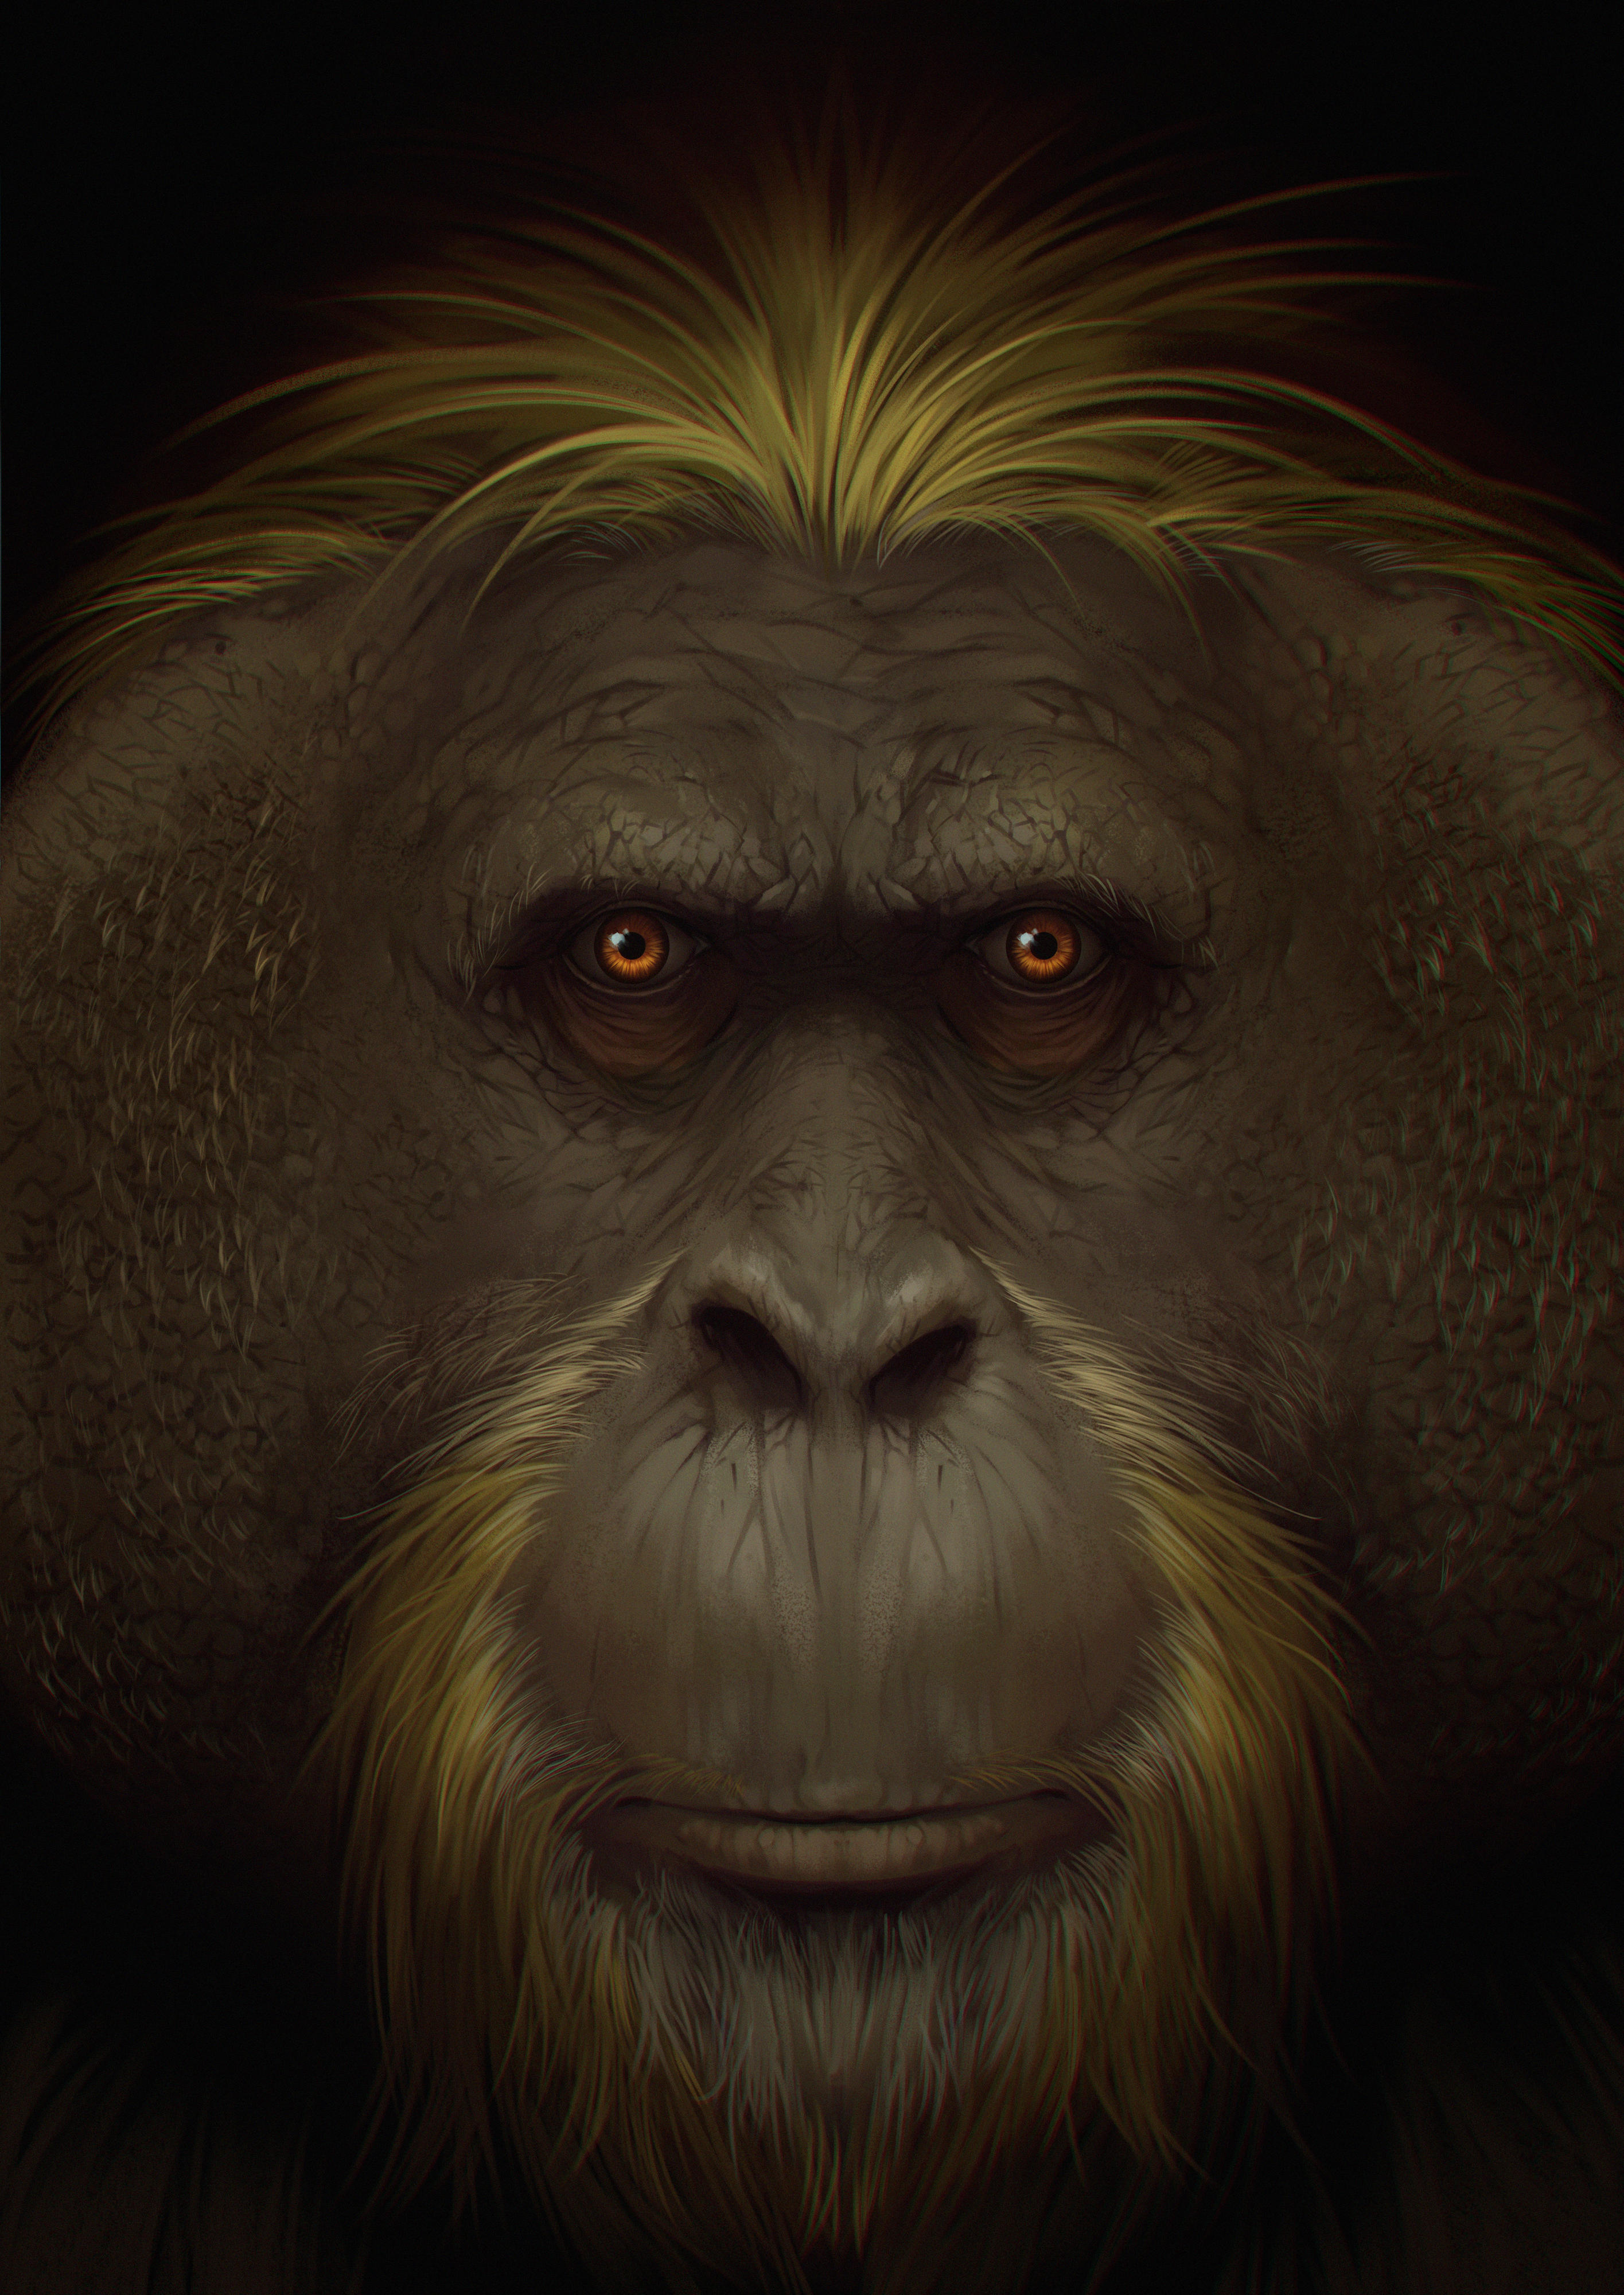 An illustration of a giant ape with brown fur